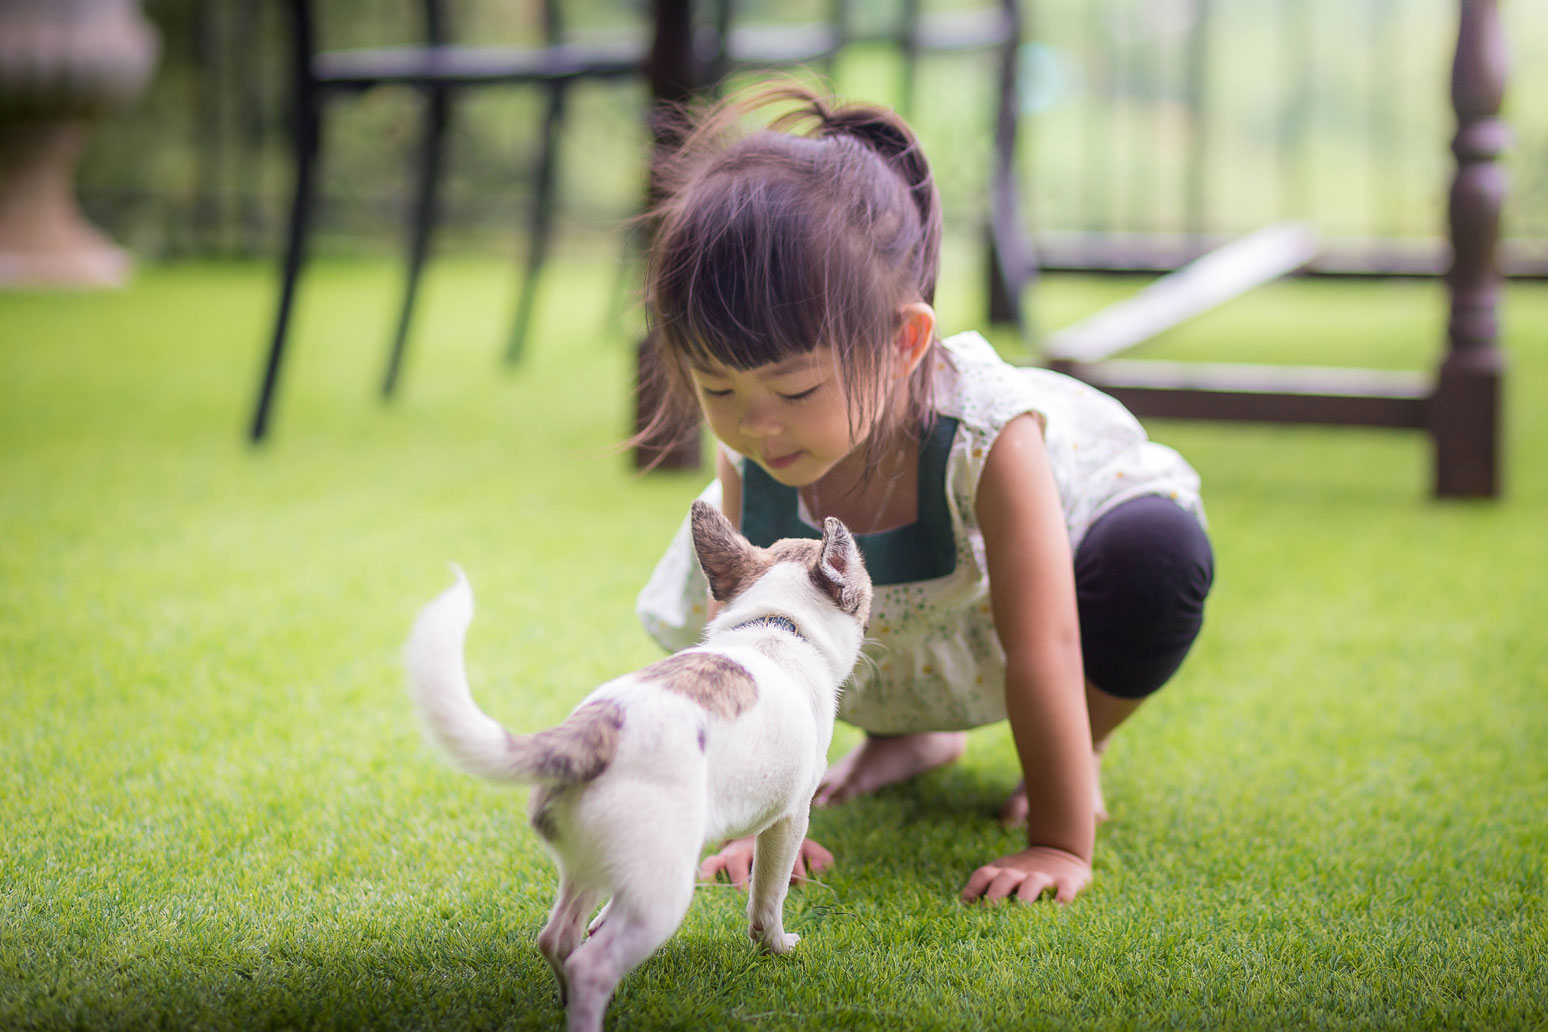 Child playing with pet on artificial turf lawn